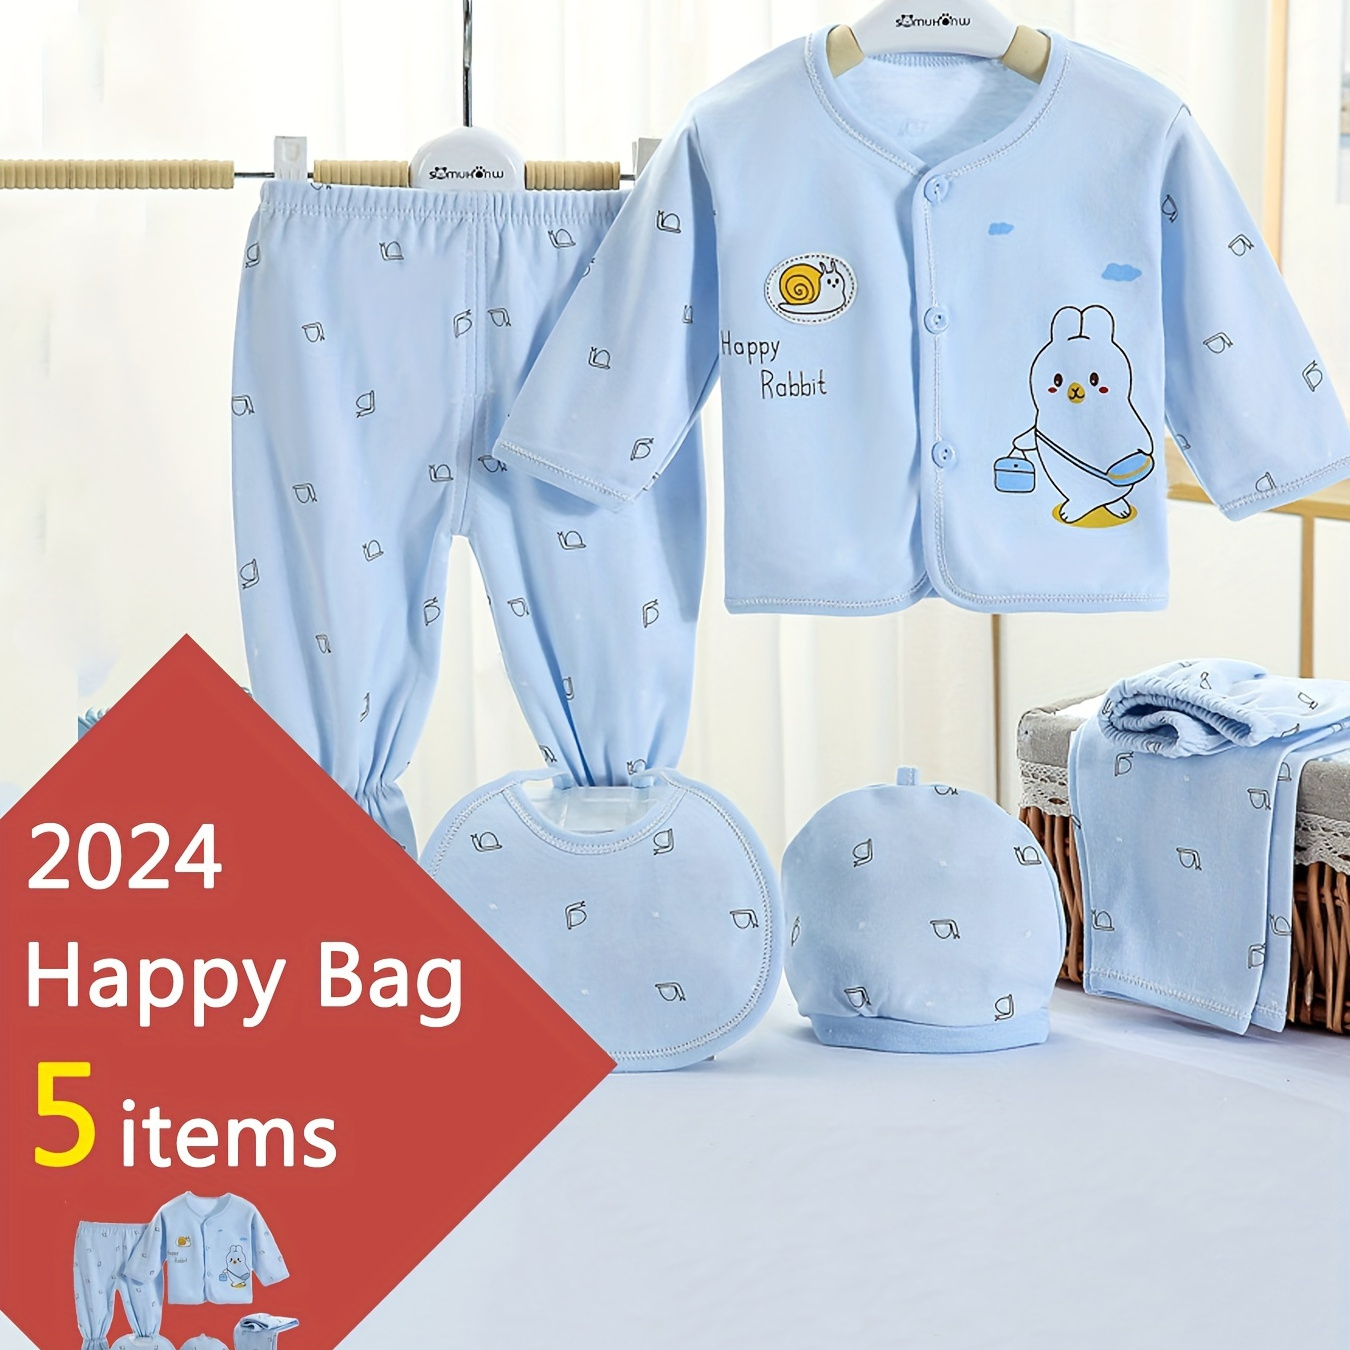 

2024 Lucky Bag, 5pcs Newborn Clothes Outfits Gifts - Cute Cartoon Graphic Cardigan Top + Hat + Footed Pants + Trousers + Bib, Toddler Baby's Cotton Loungewear Set, Suitable For 0-3 Months